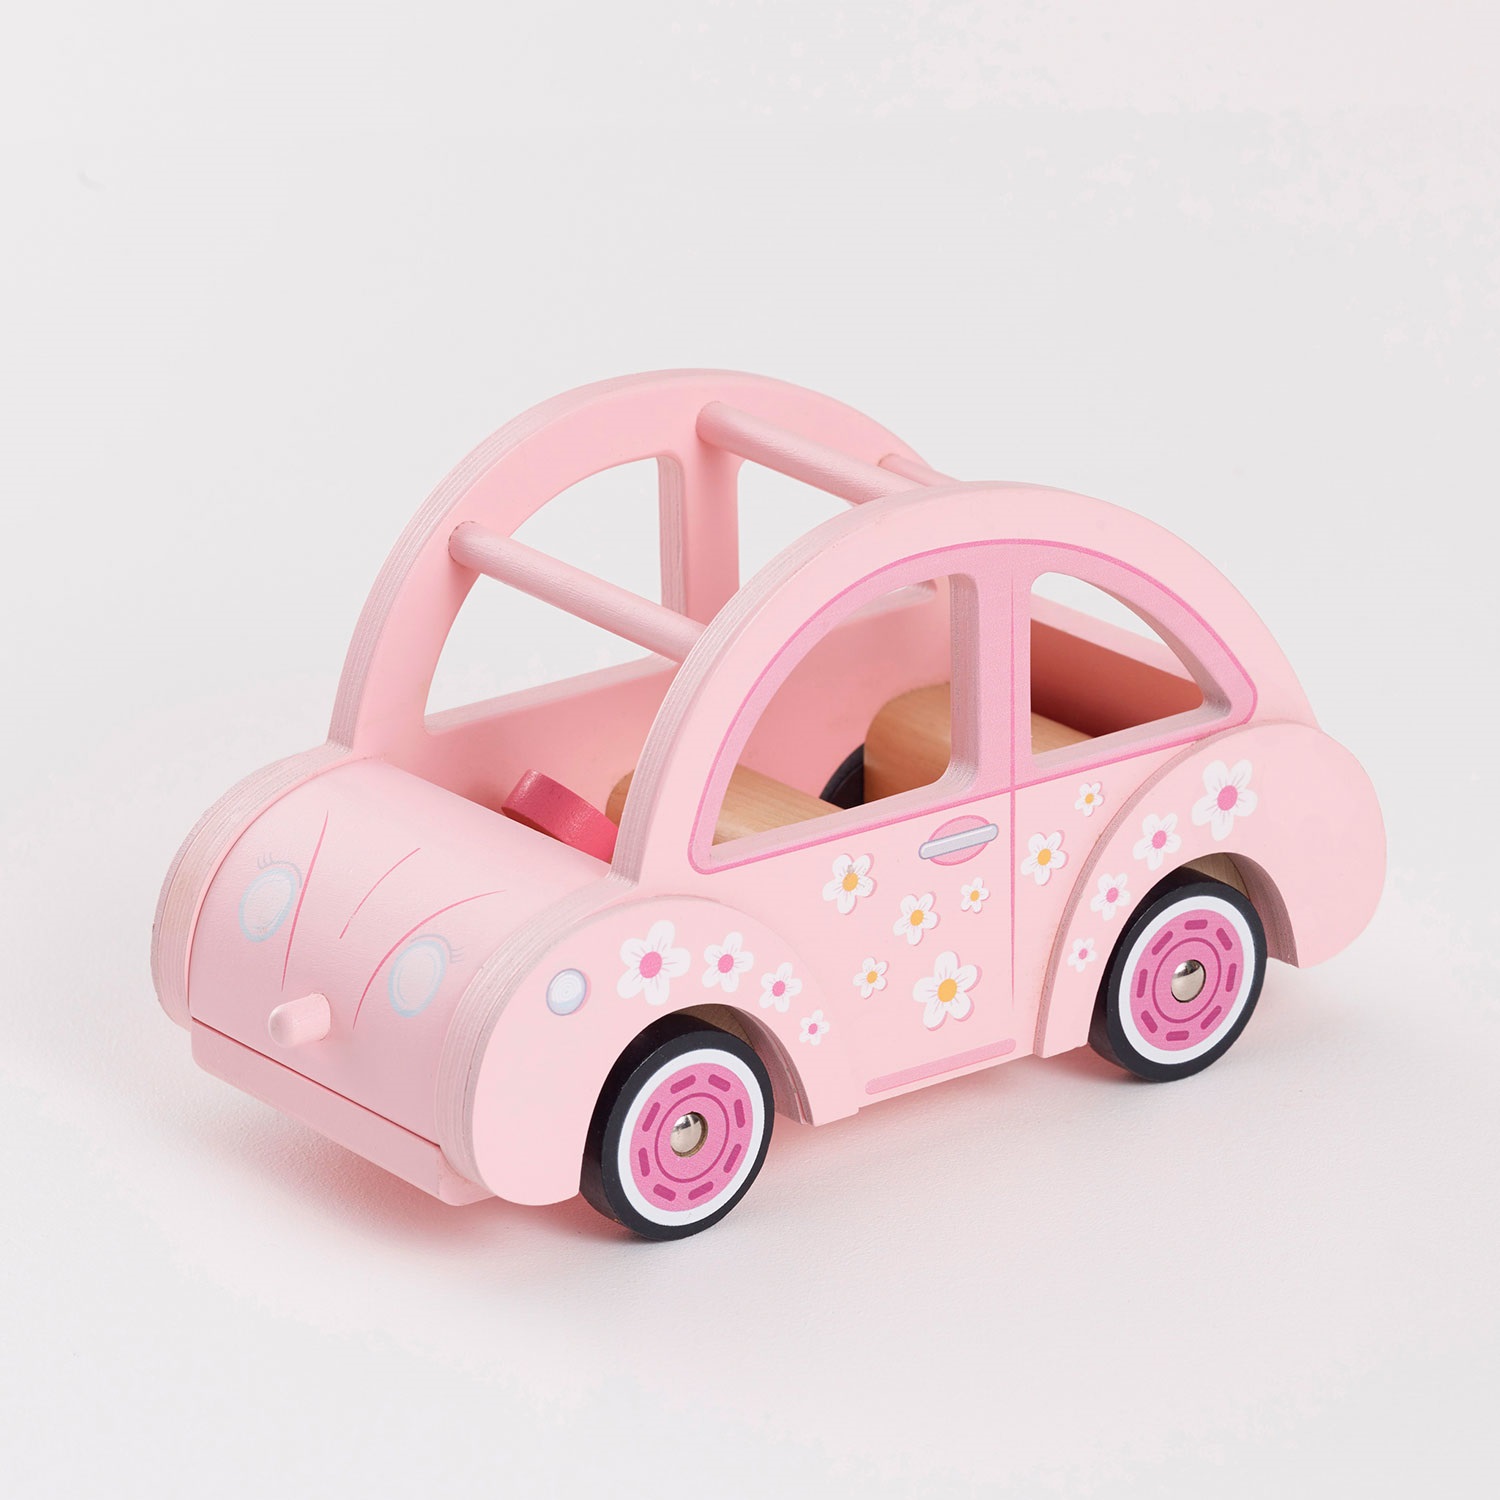 Sophies Auto / Sophies Dolls House Toy Car